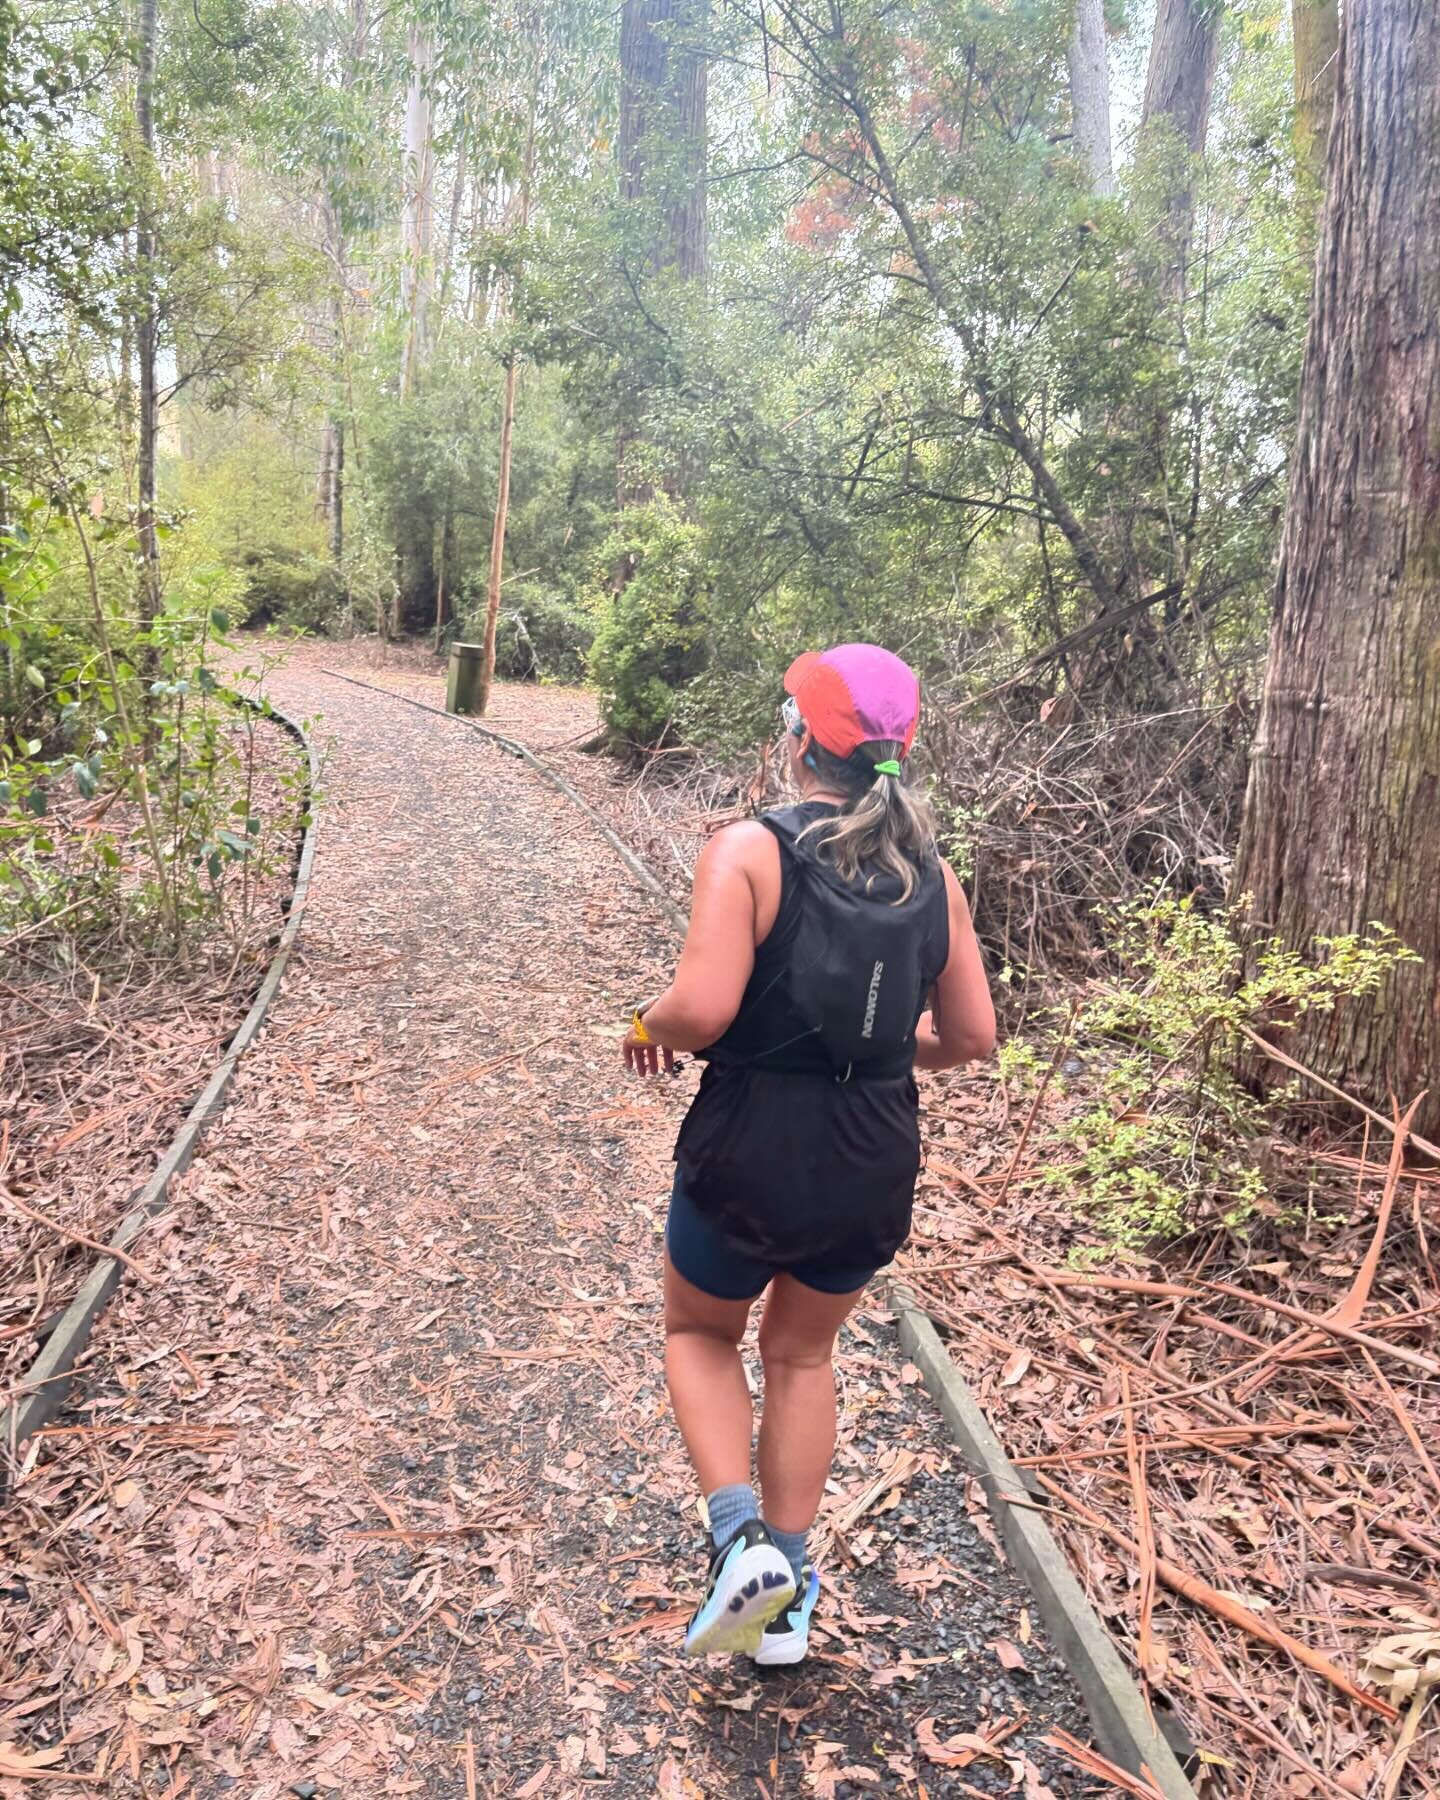 Today is a Recce day, perfect for finding the ideal course to conquer Run Auckland&rsquo;s challenging 21km and 10km routes. The course is around our local area where I used to run a lot as a newbie doing intervals. Super fun morning with Steff xxx n